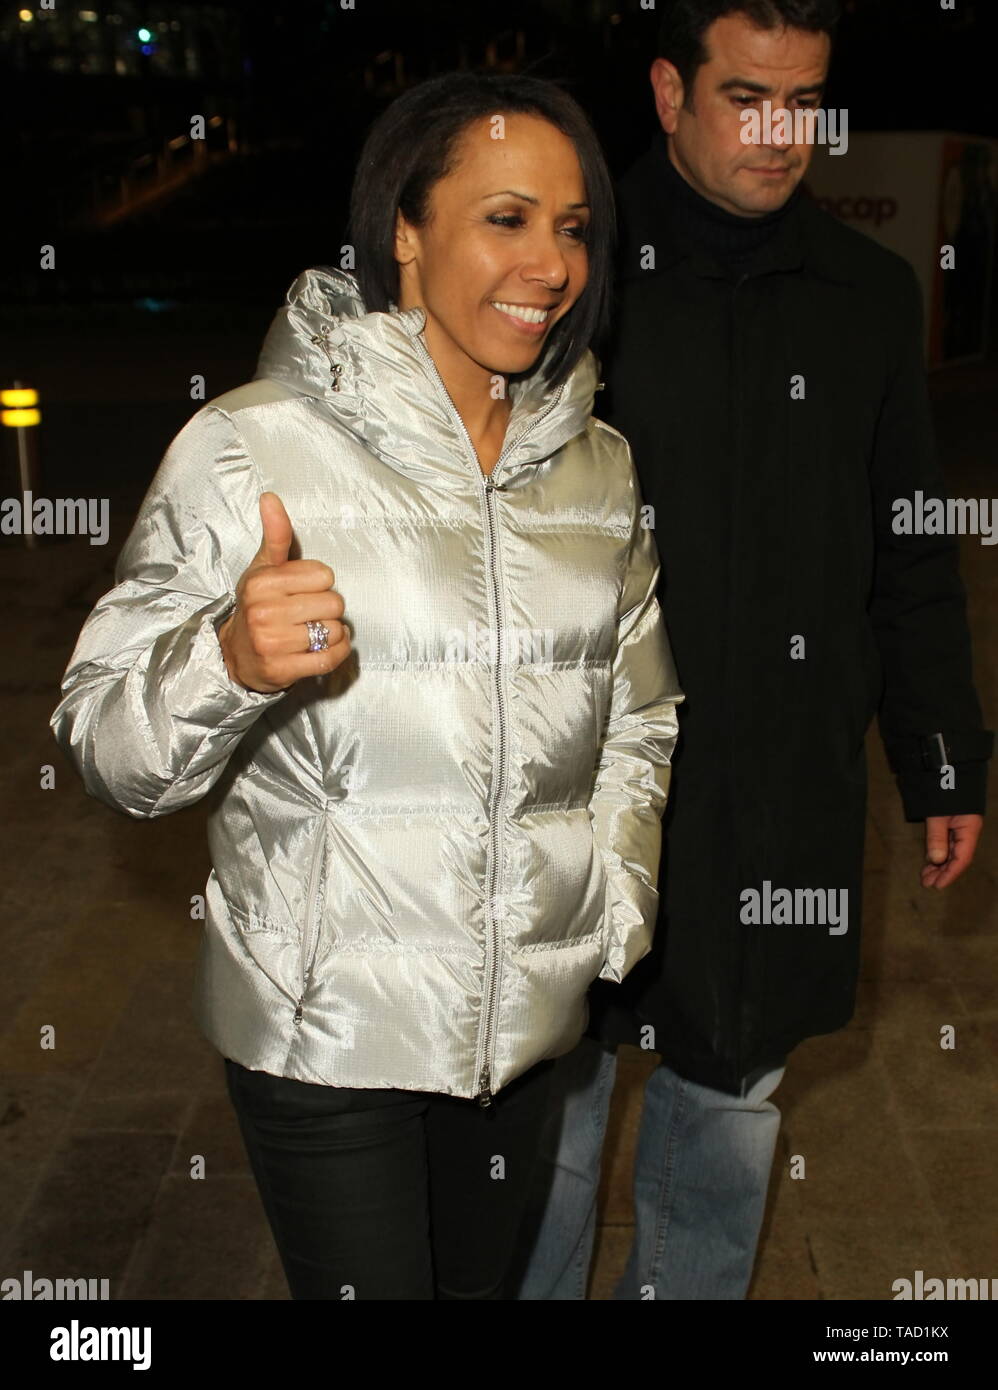 Dame Kelly Holmes spotted in Liverpool credit Ian Fairbrother/Alamy Stock Photos Stock Photo